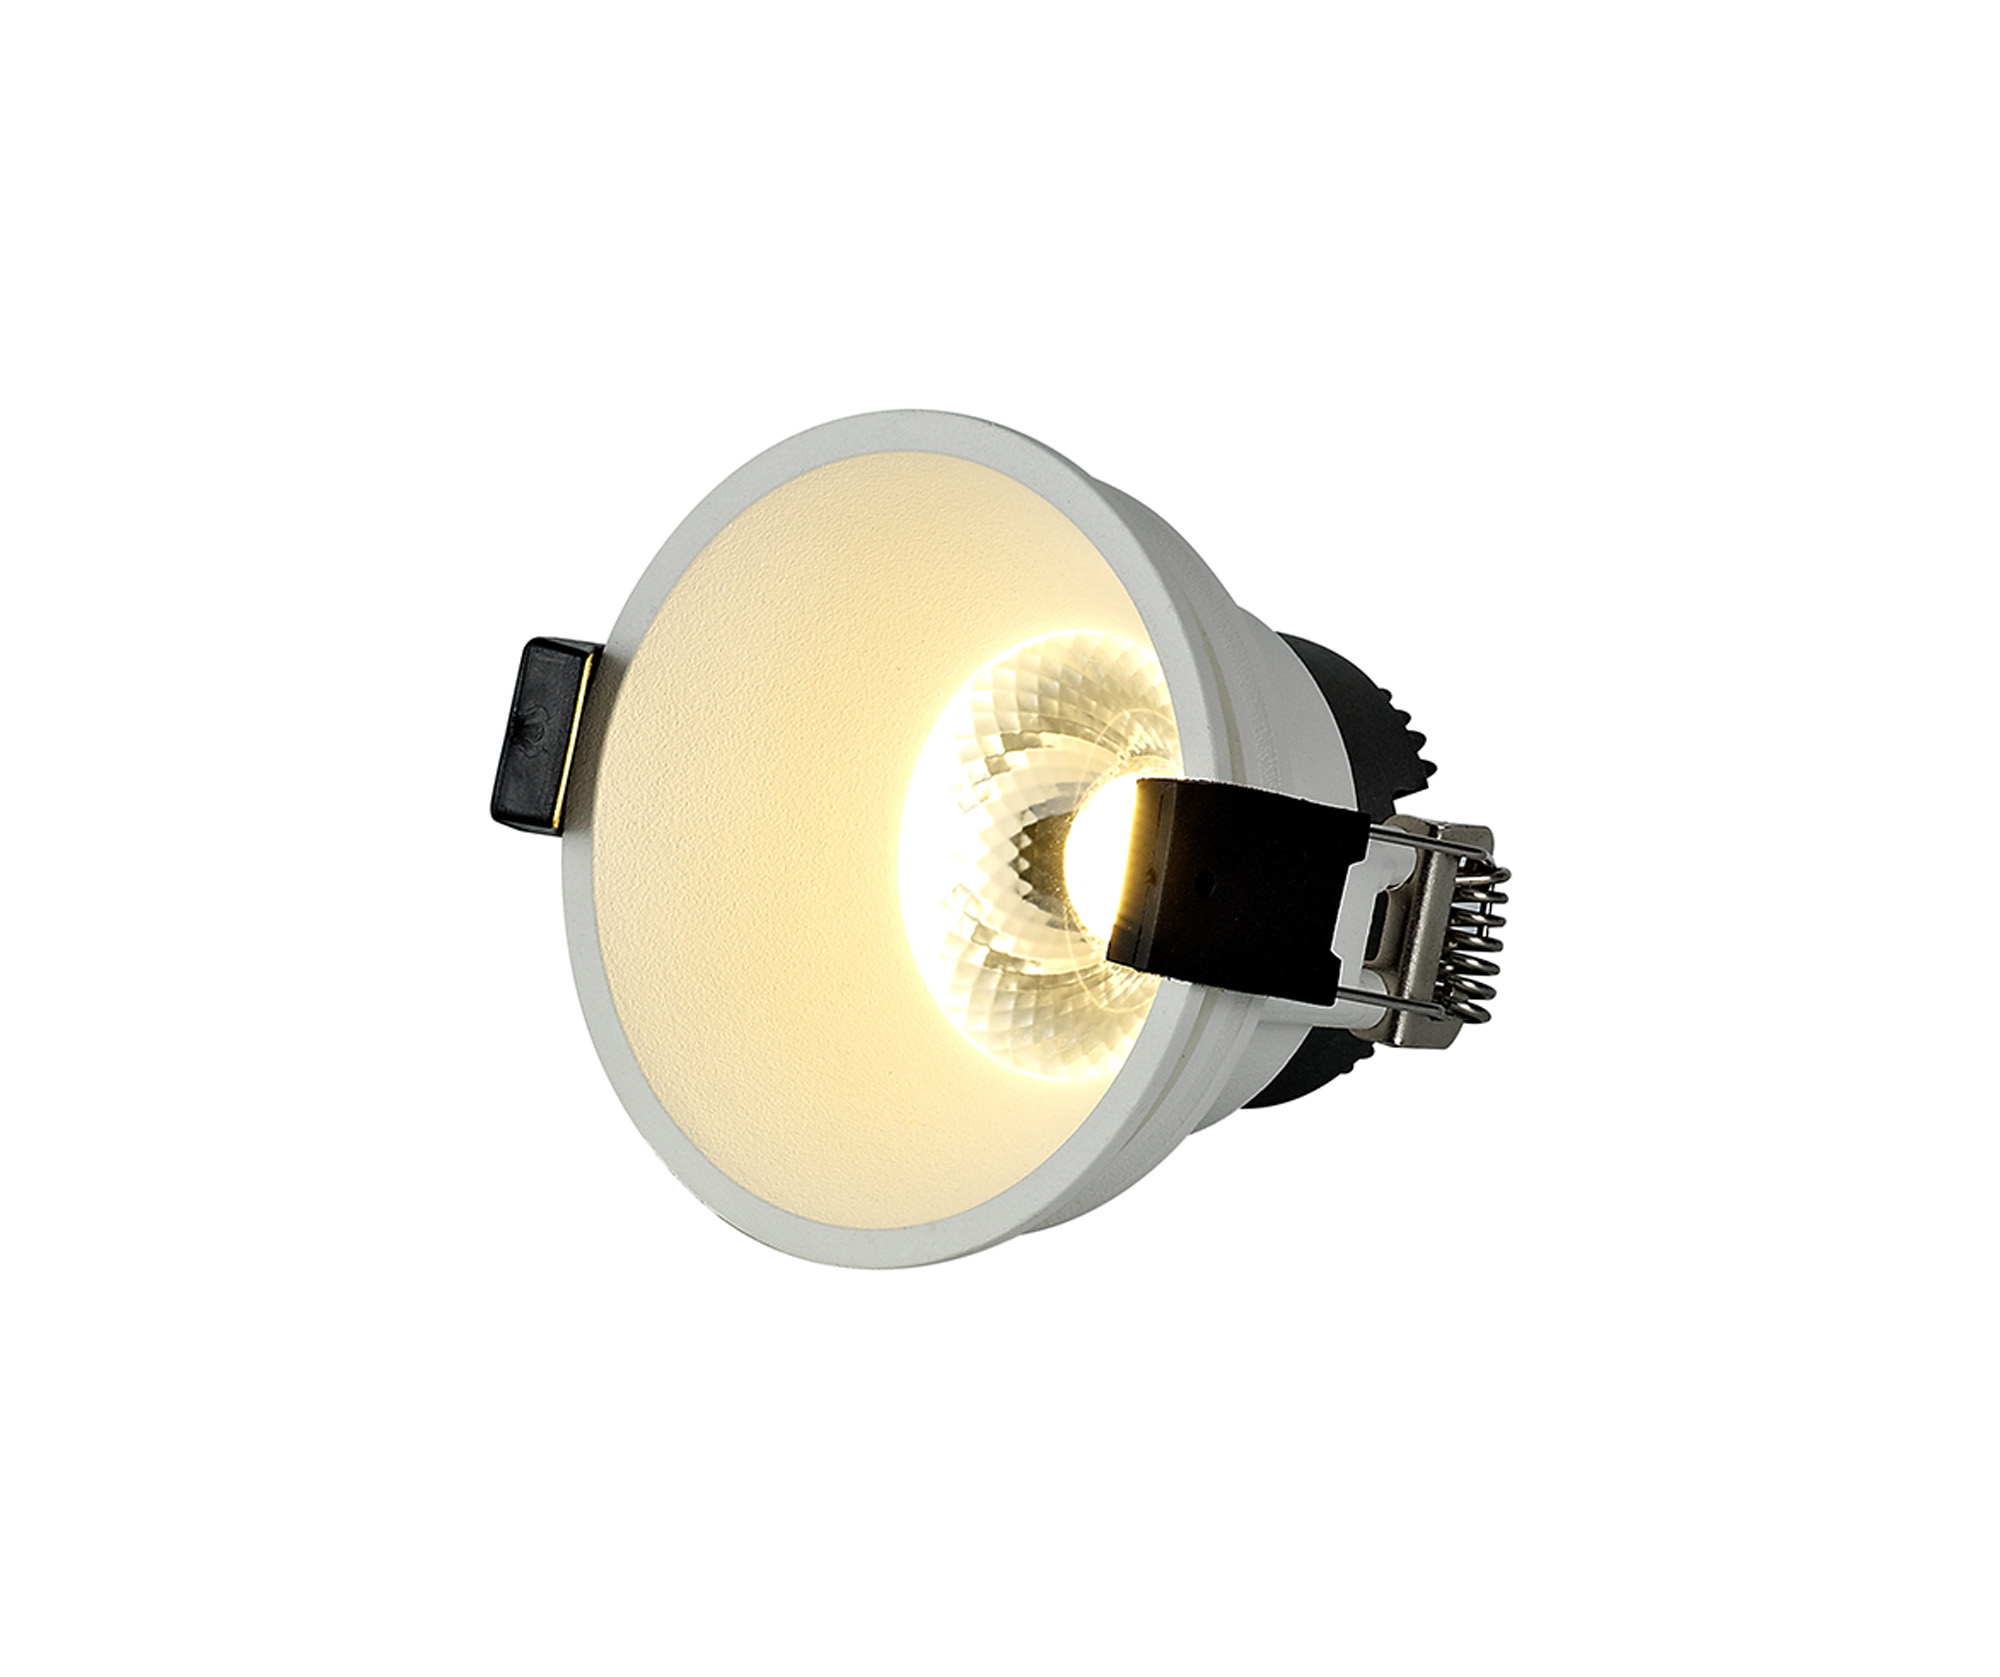 DM201616  Bania 8S 8W ;180mA 480lm 3000K 60° LED Engine; White IP65 Fixed Recessed Spotlight Inner Glass cover; 5yrs Warranty